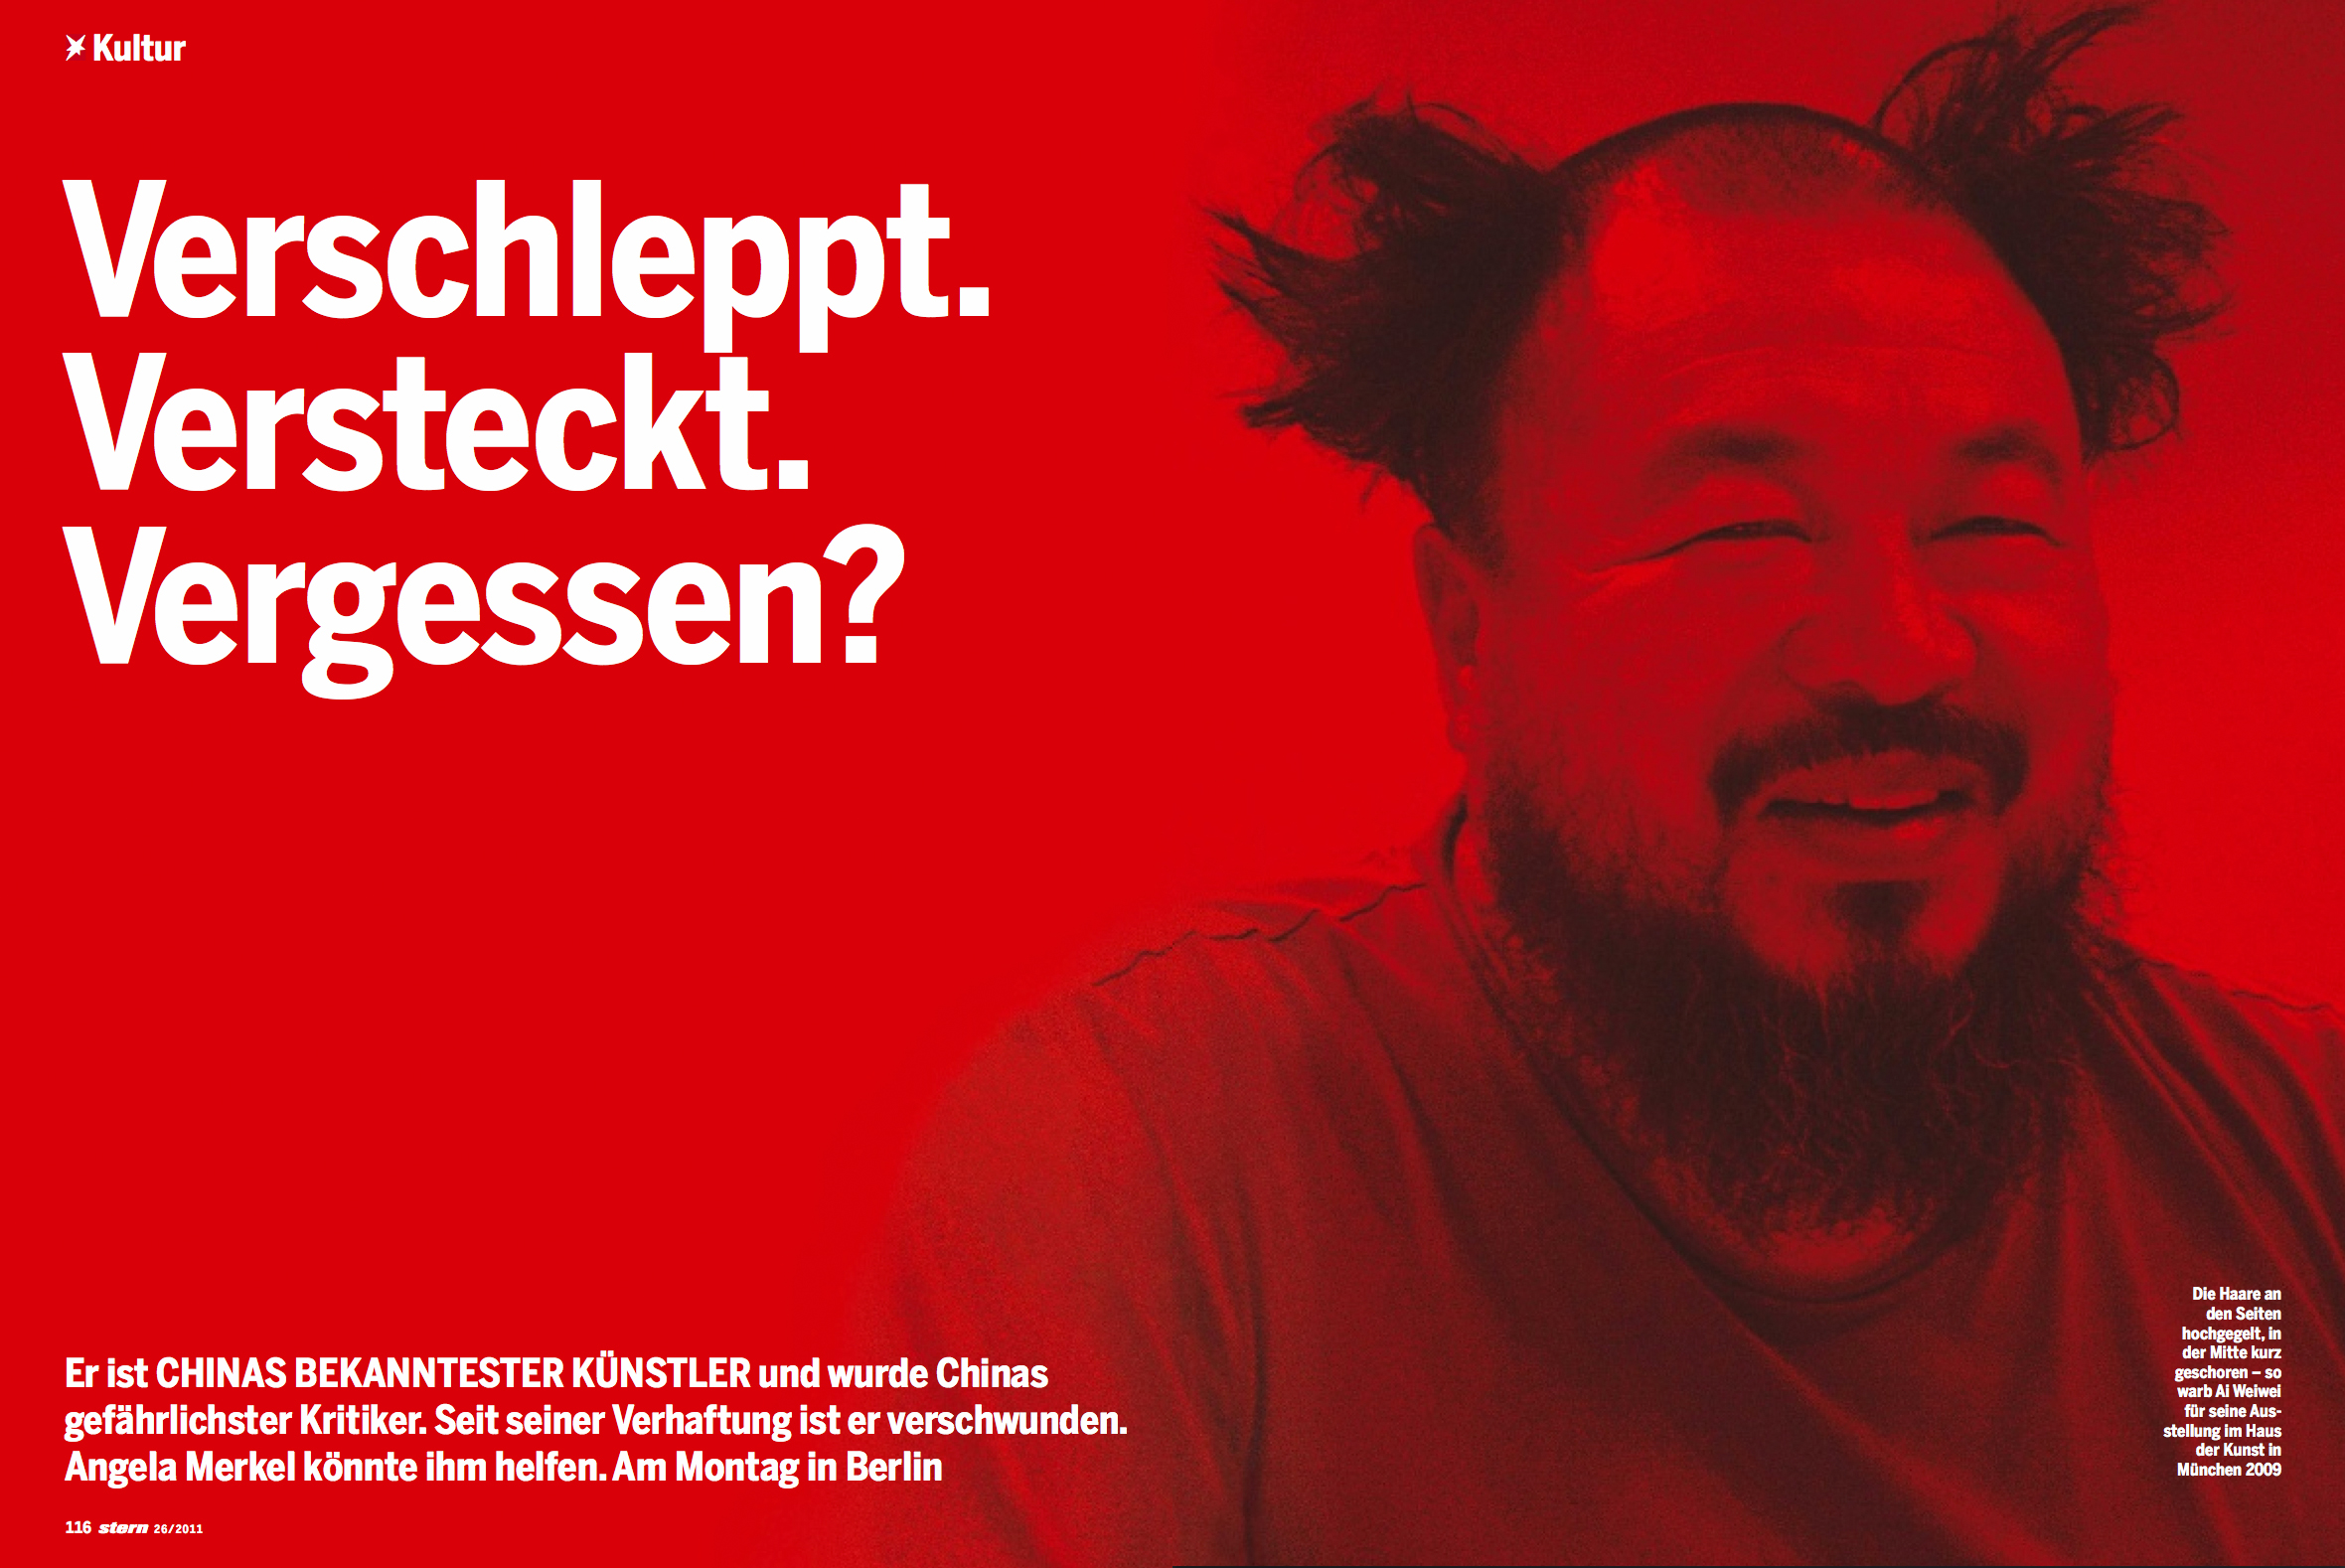 "Where is Ai Weiwei", stern 26/2011 "It can happen any day. When it does, I would be most afraid of the daily simple things such as if it is possible to shower in prison. Sometimes I cannot sleep in hotels because of the soft cushion. Are there any cushions in prison" - Ai Weiwei was expecting something like that when stern met him last in October 2010. Now it has been reality, he was not seen since the beginning of April 2011. The police took him to a hidden place, without any accusation, no lawyer and no contact to his family. Angela Merkel could help him, on monday, when China`s communist party leader Wen Jiabao comes to visit Berlin.